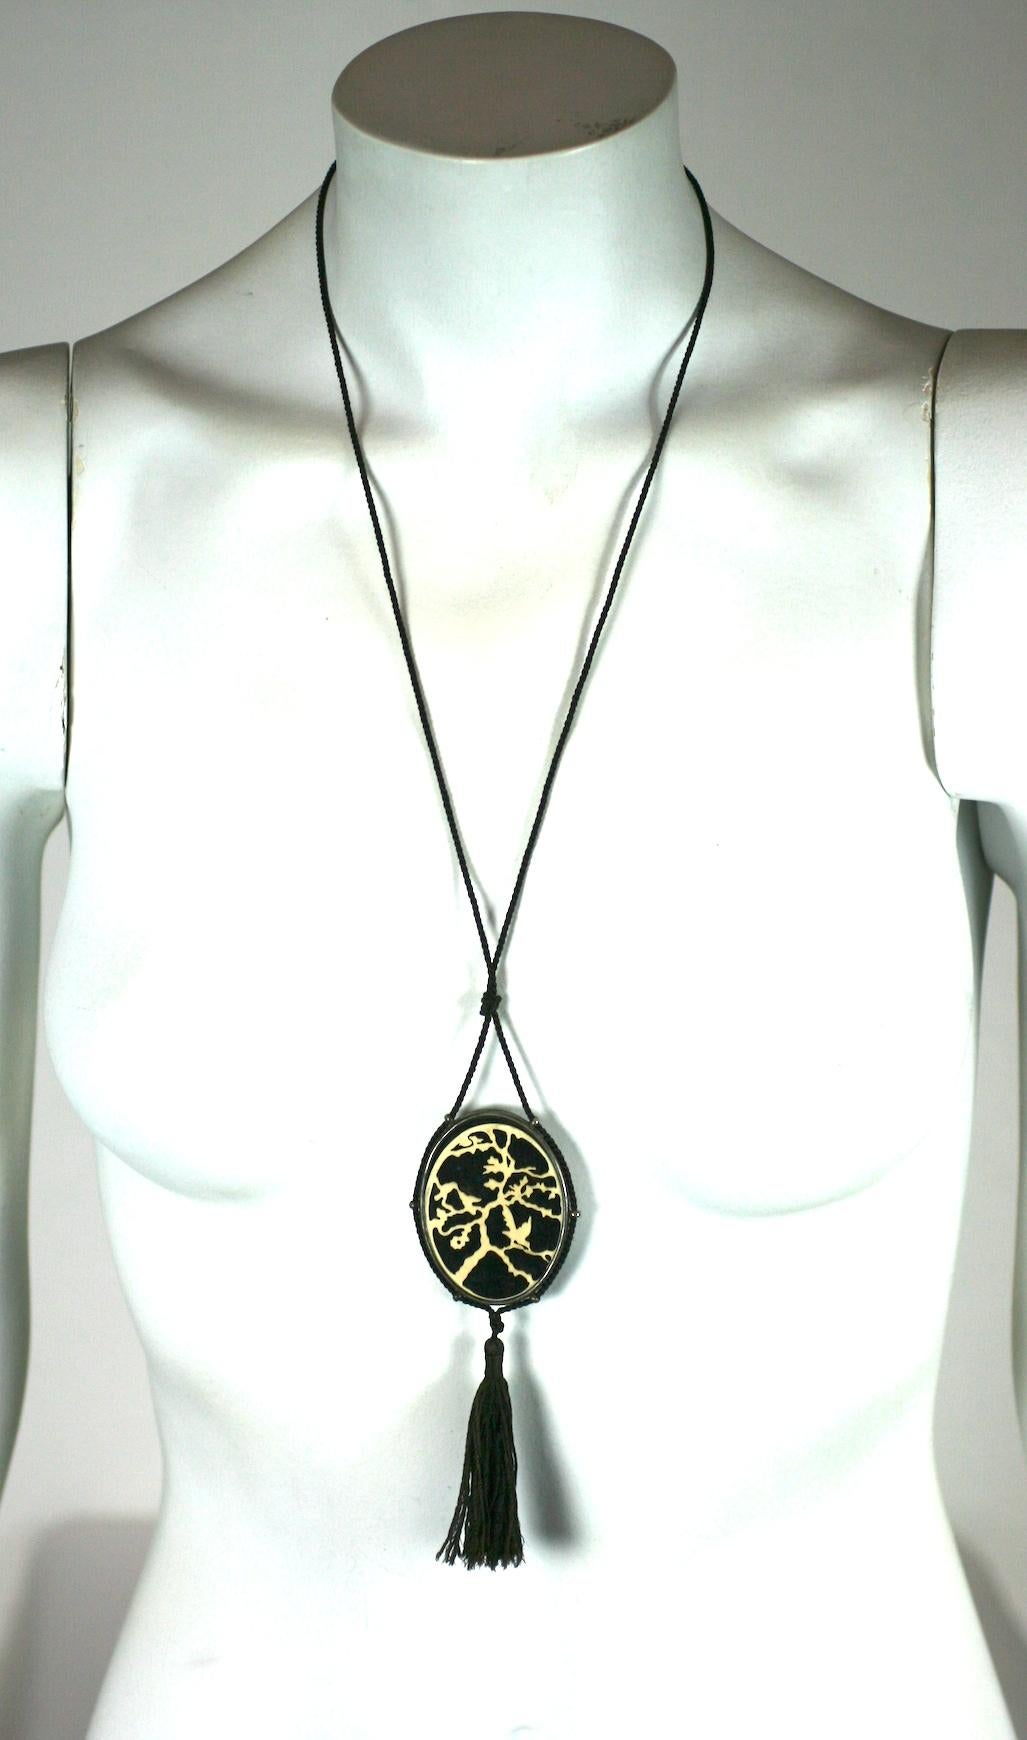  French Art Deco Japonesque Pendant Necklace In Excellent Condition For Sale In New York, NY